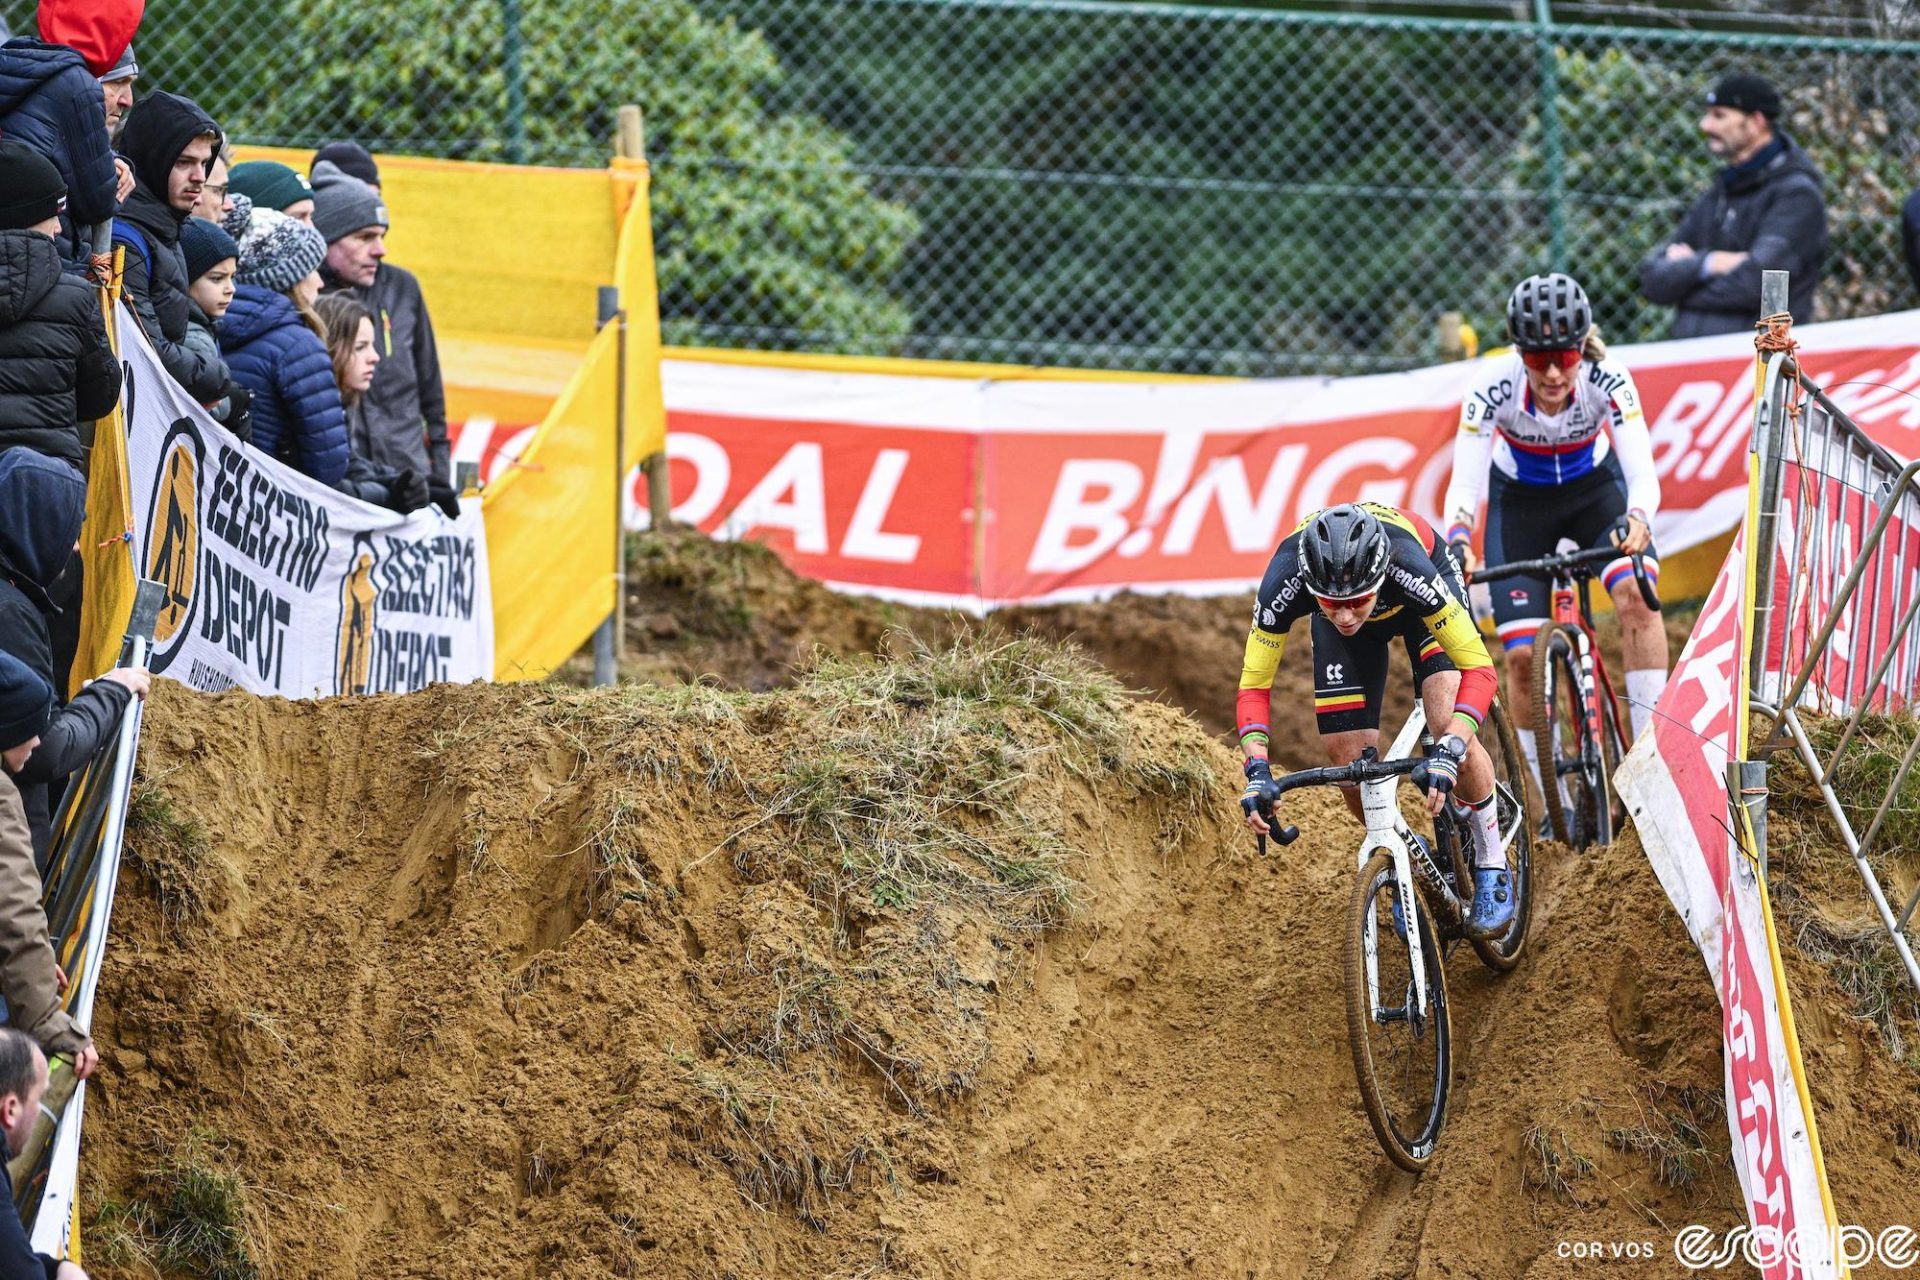 Sanne Cant drops in to a deeply rutted, sandy drop. Kristyna Zemanova is close on her wheel.